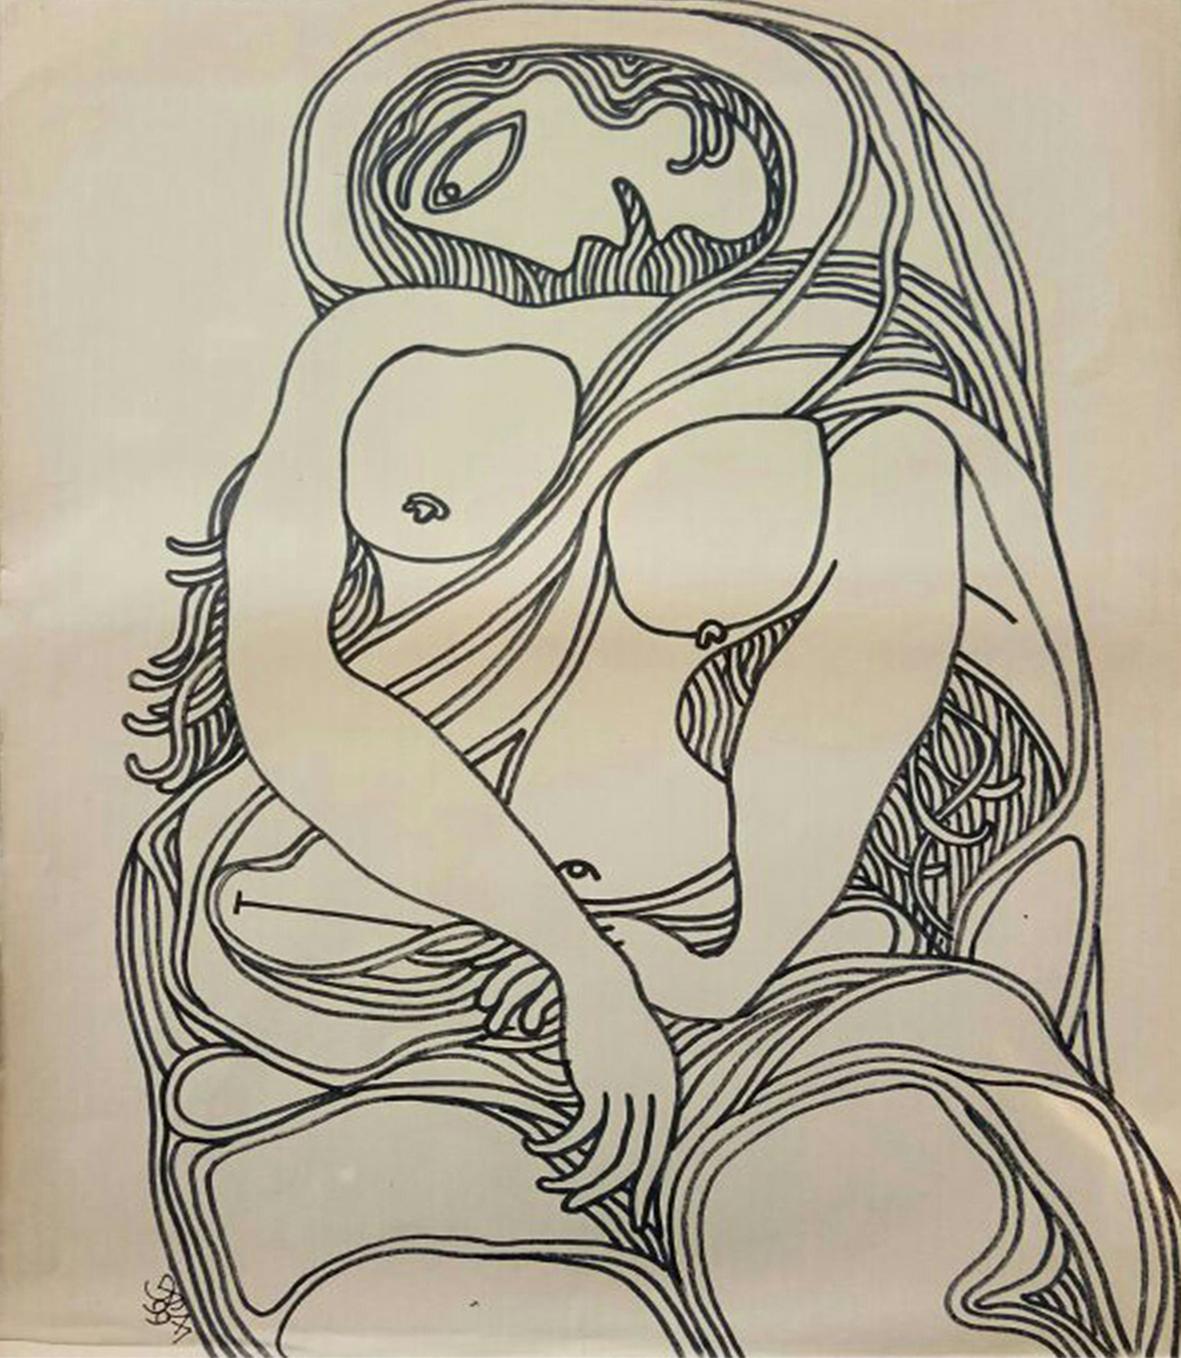 Prakash Karmakar - Untitled - 23 X 20 inches (unframed size)
Marker on Paper
Delivery of shipment in ready to hang condition.

Style : Legendary master artist Lt. Prokash Karmakar from Bengal was solely responsible for the Bengal Movement of Art.